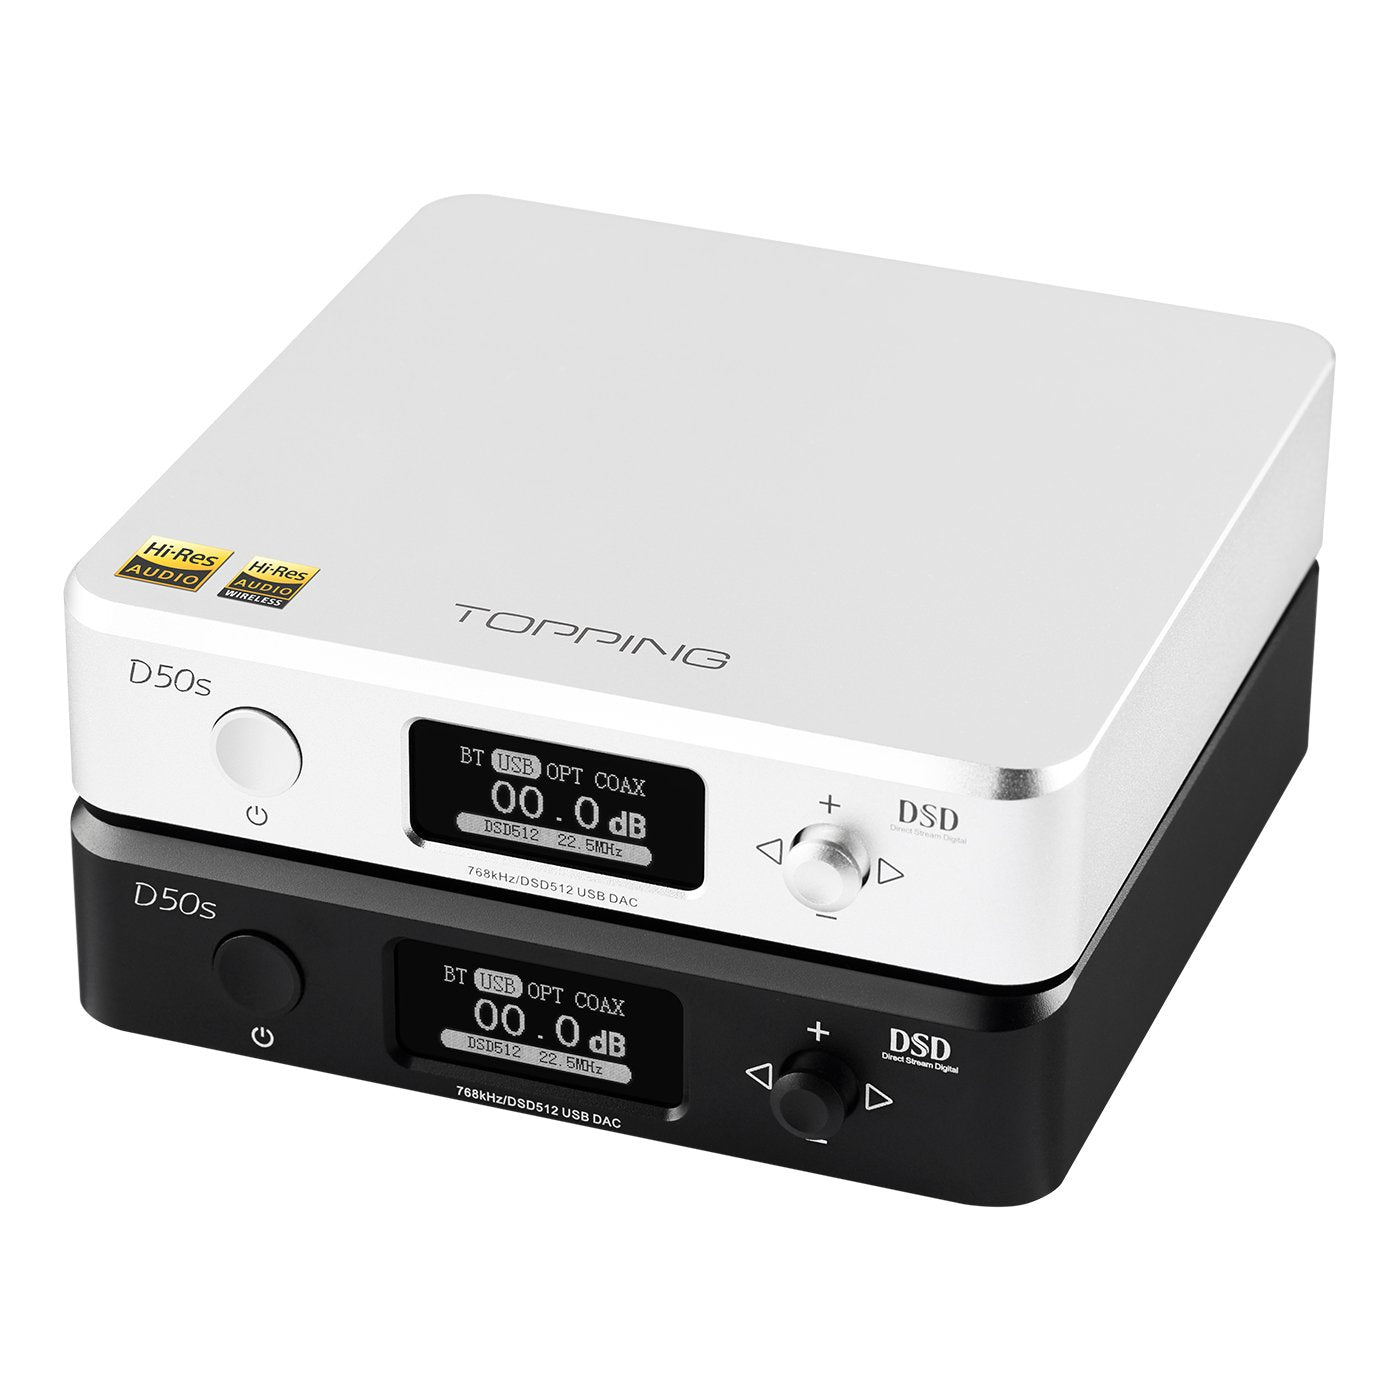 TOPPING D50s DAC (Digital-to-Analog Converter)